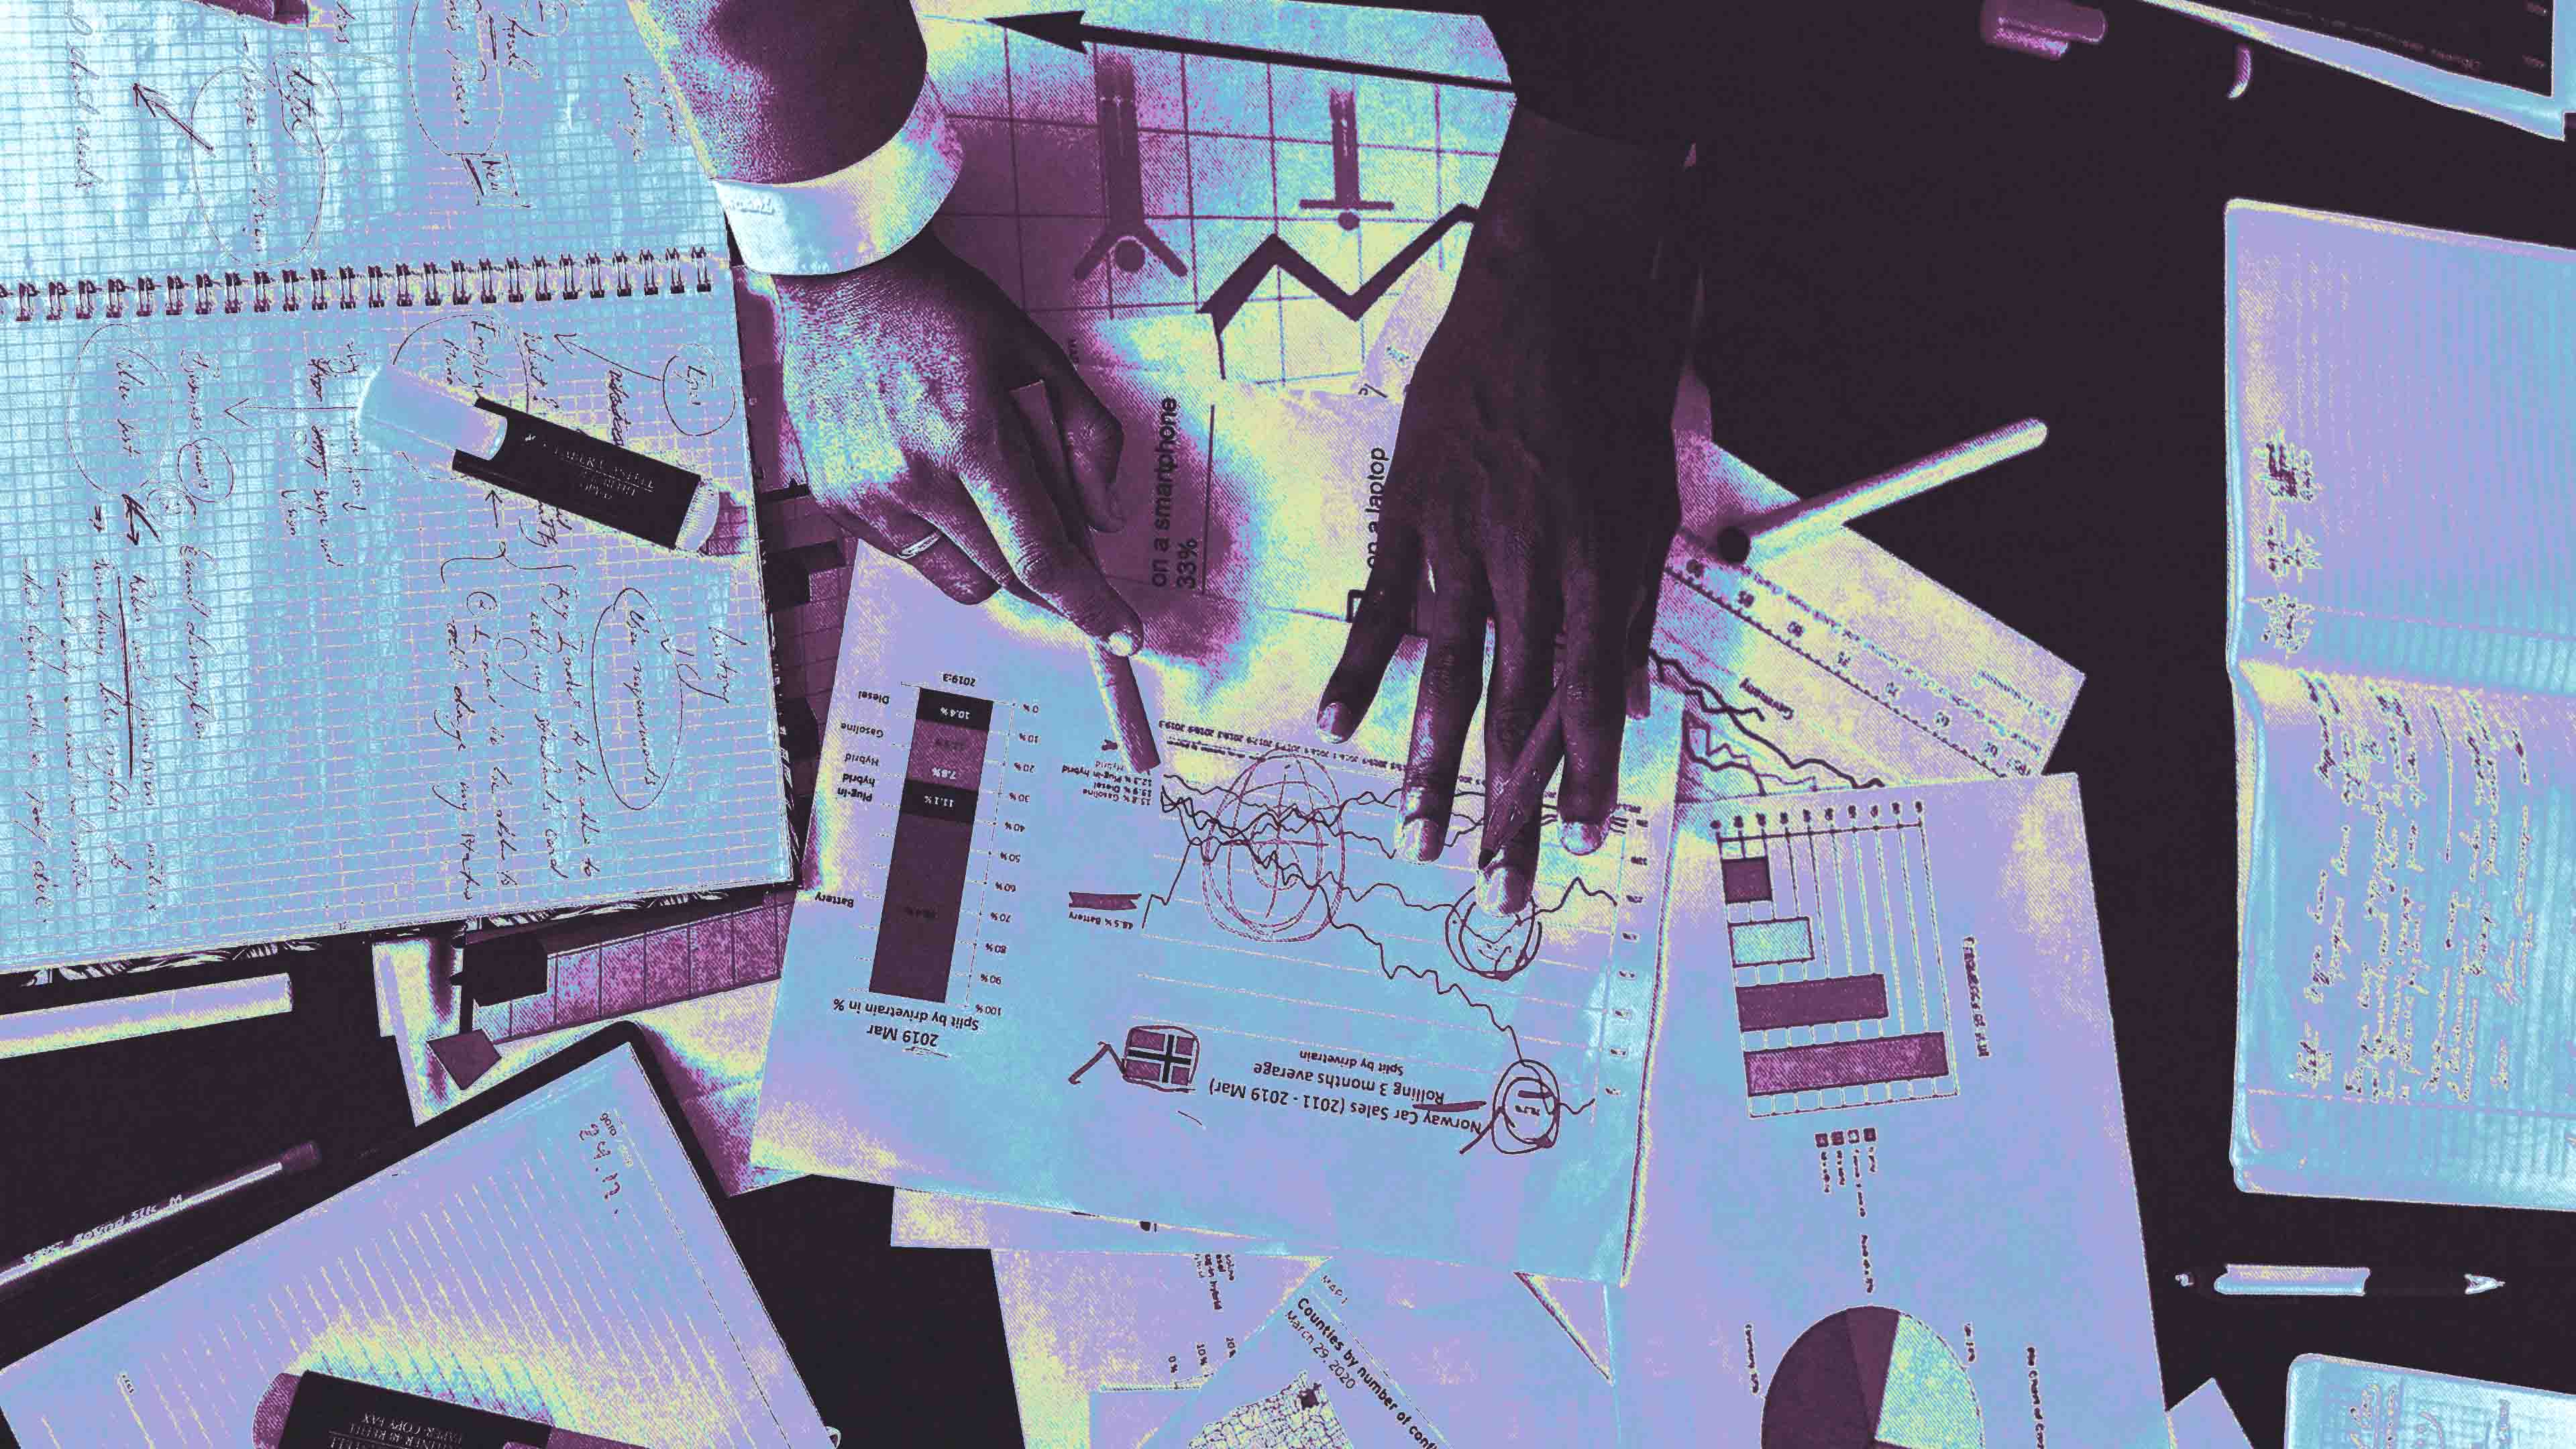 Two hands exploring a pile of paperwork on a desk. The image has been highly stylized to appear toxic.